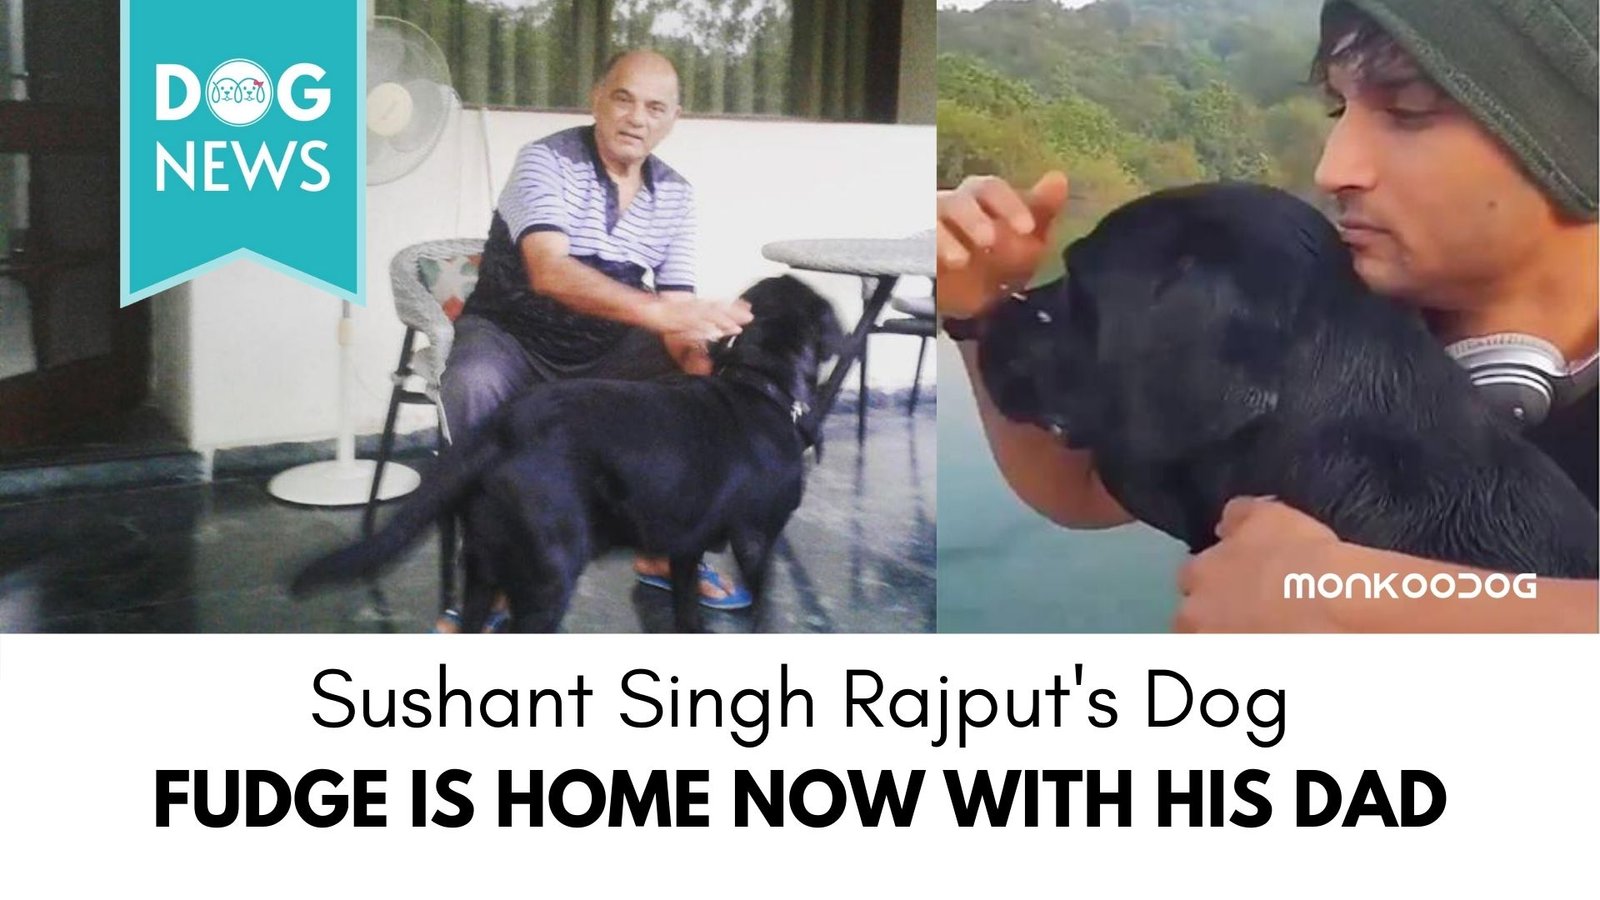 Sushant Singh Rajput’s Sister post Photos of his Dog and Dad one month after the Actor’s Alleged Suicide